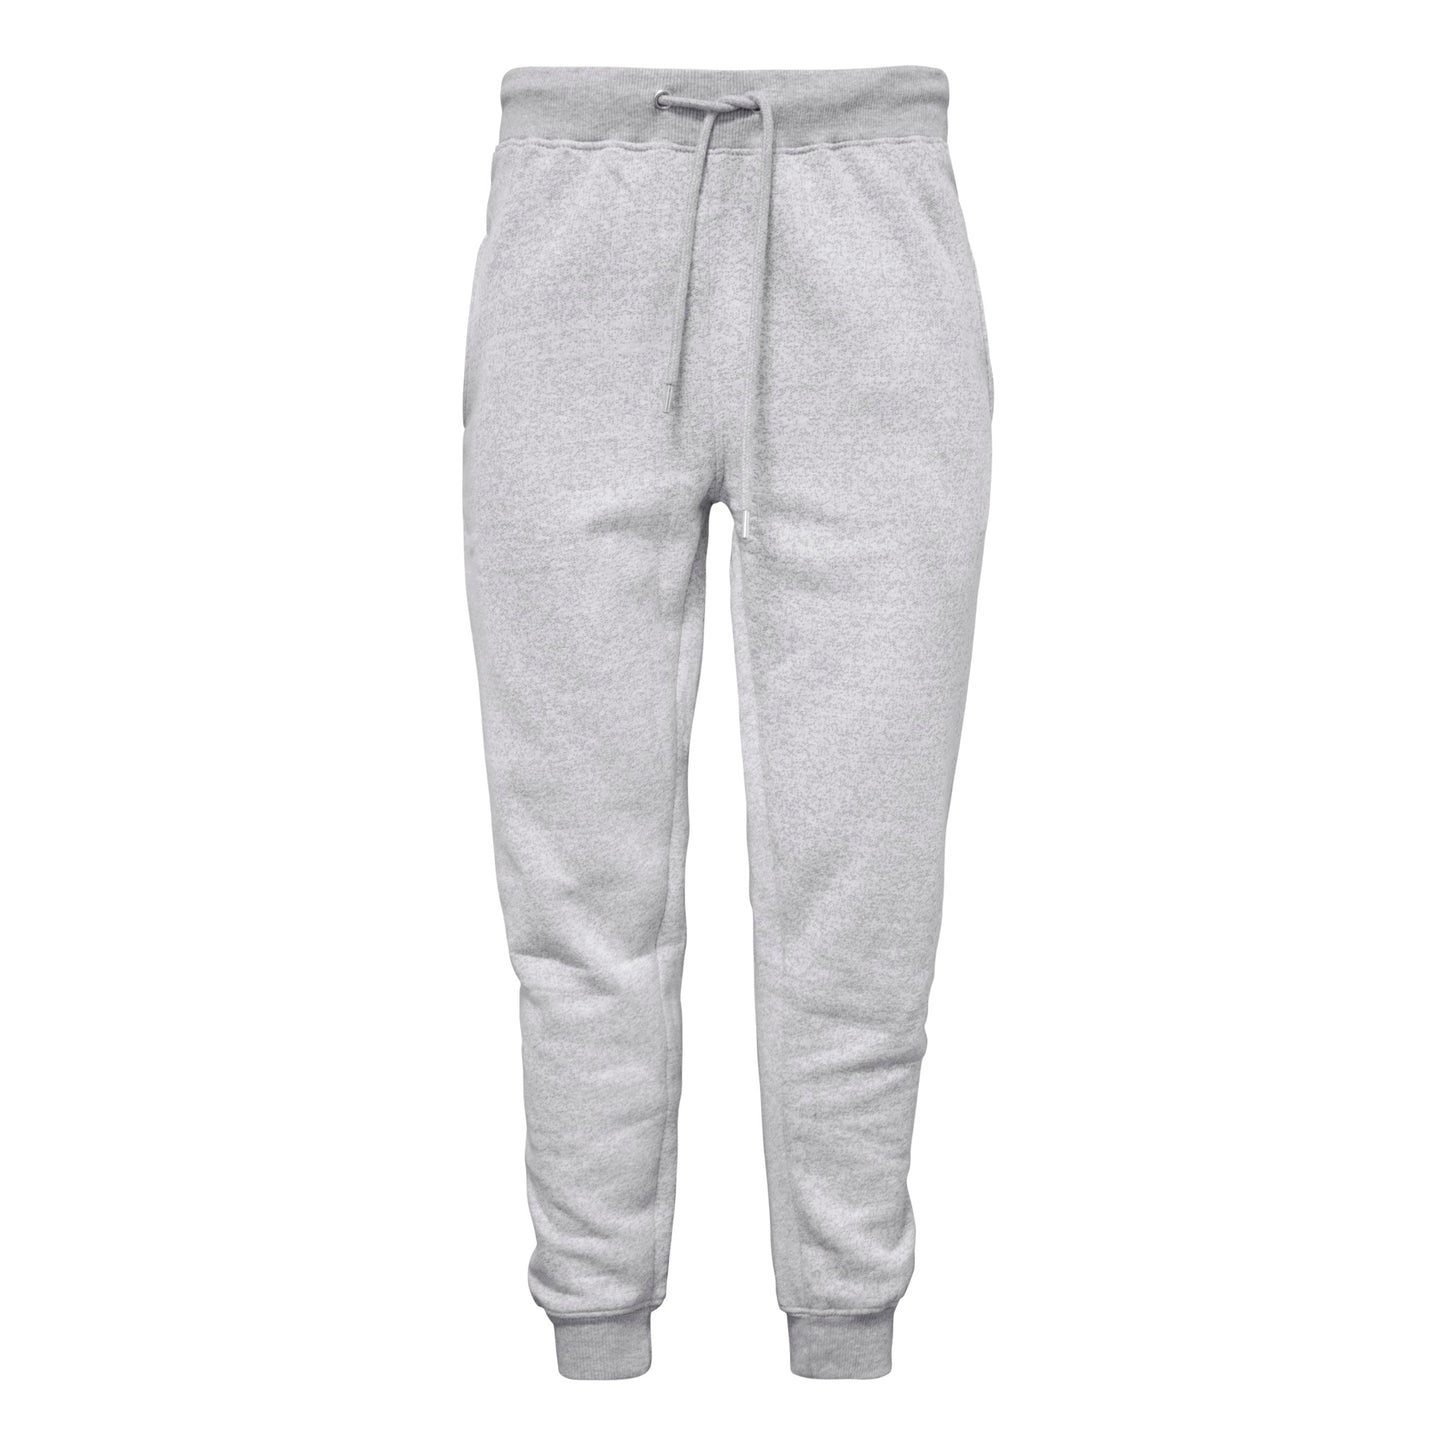 Light Grey Dotted Print Joggers - Slim Fit